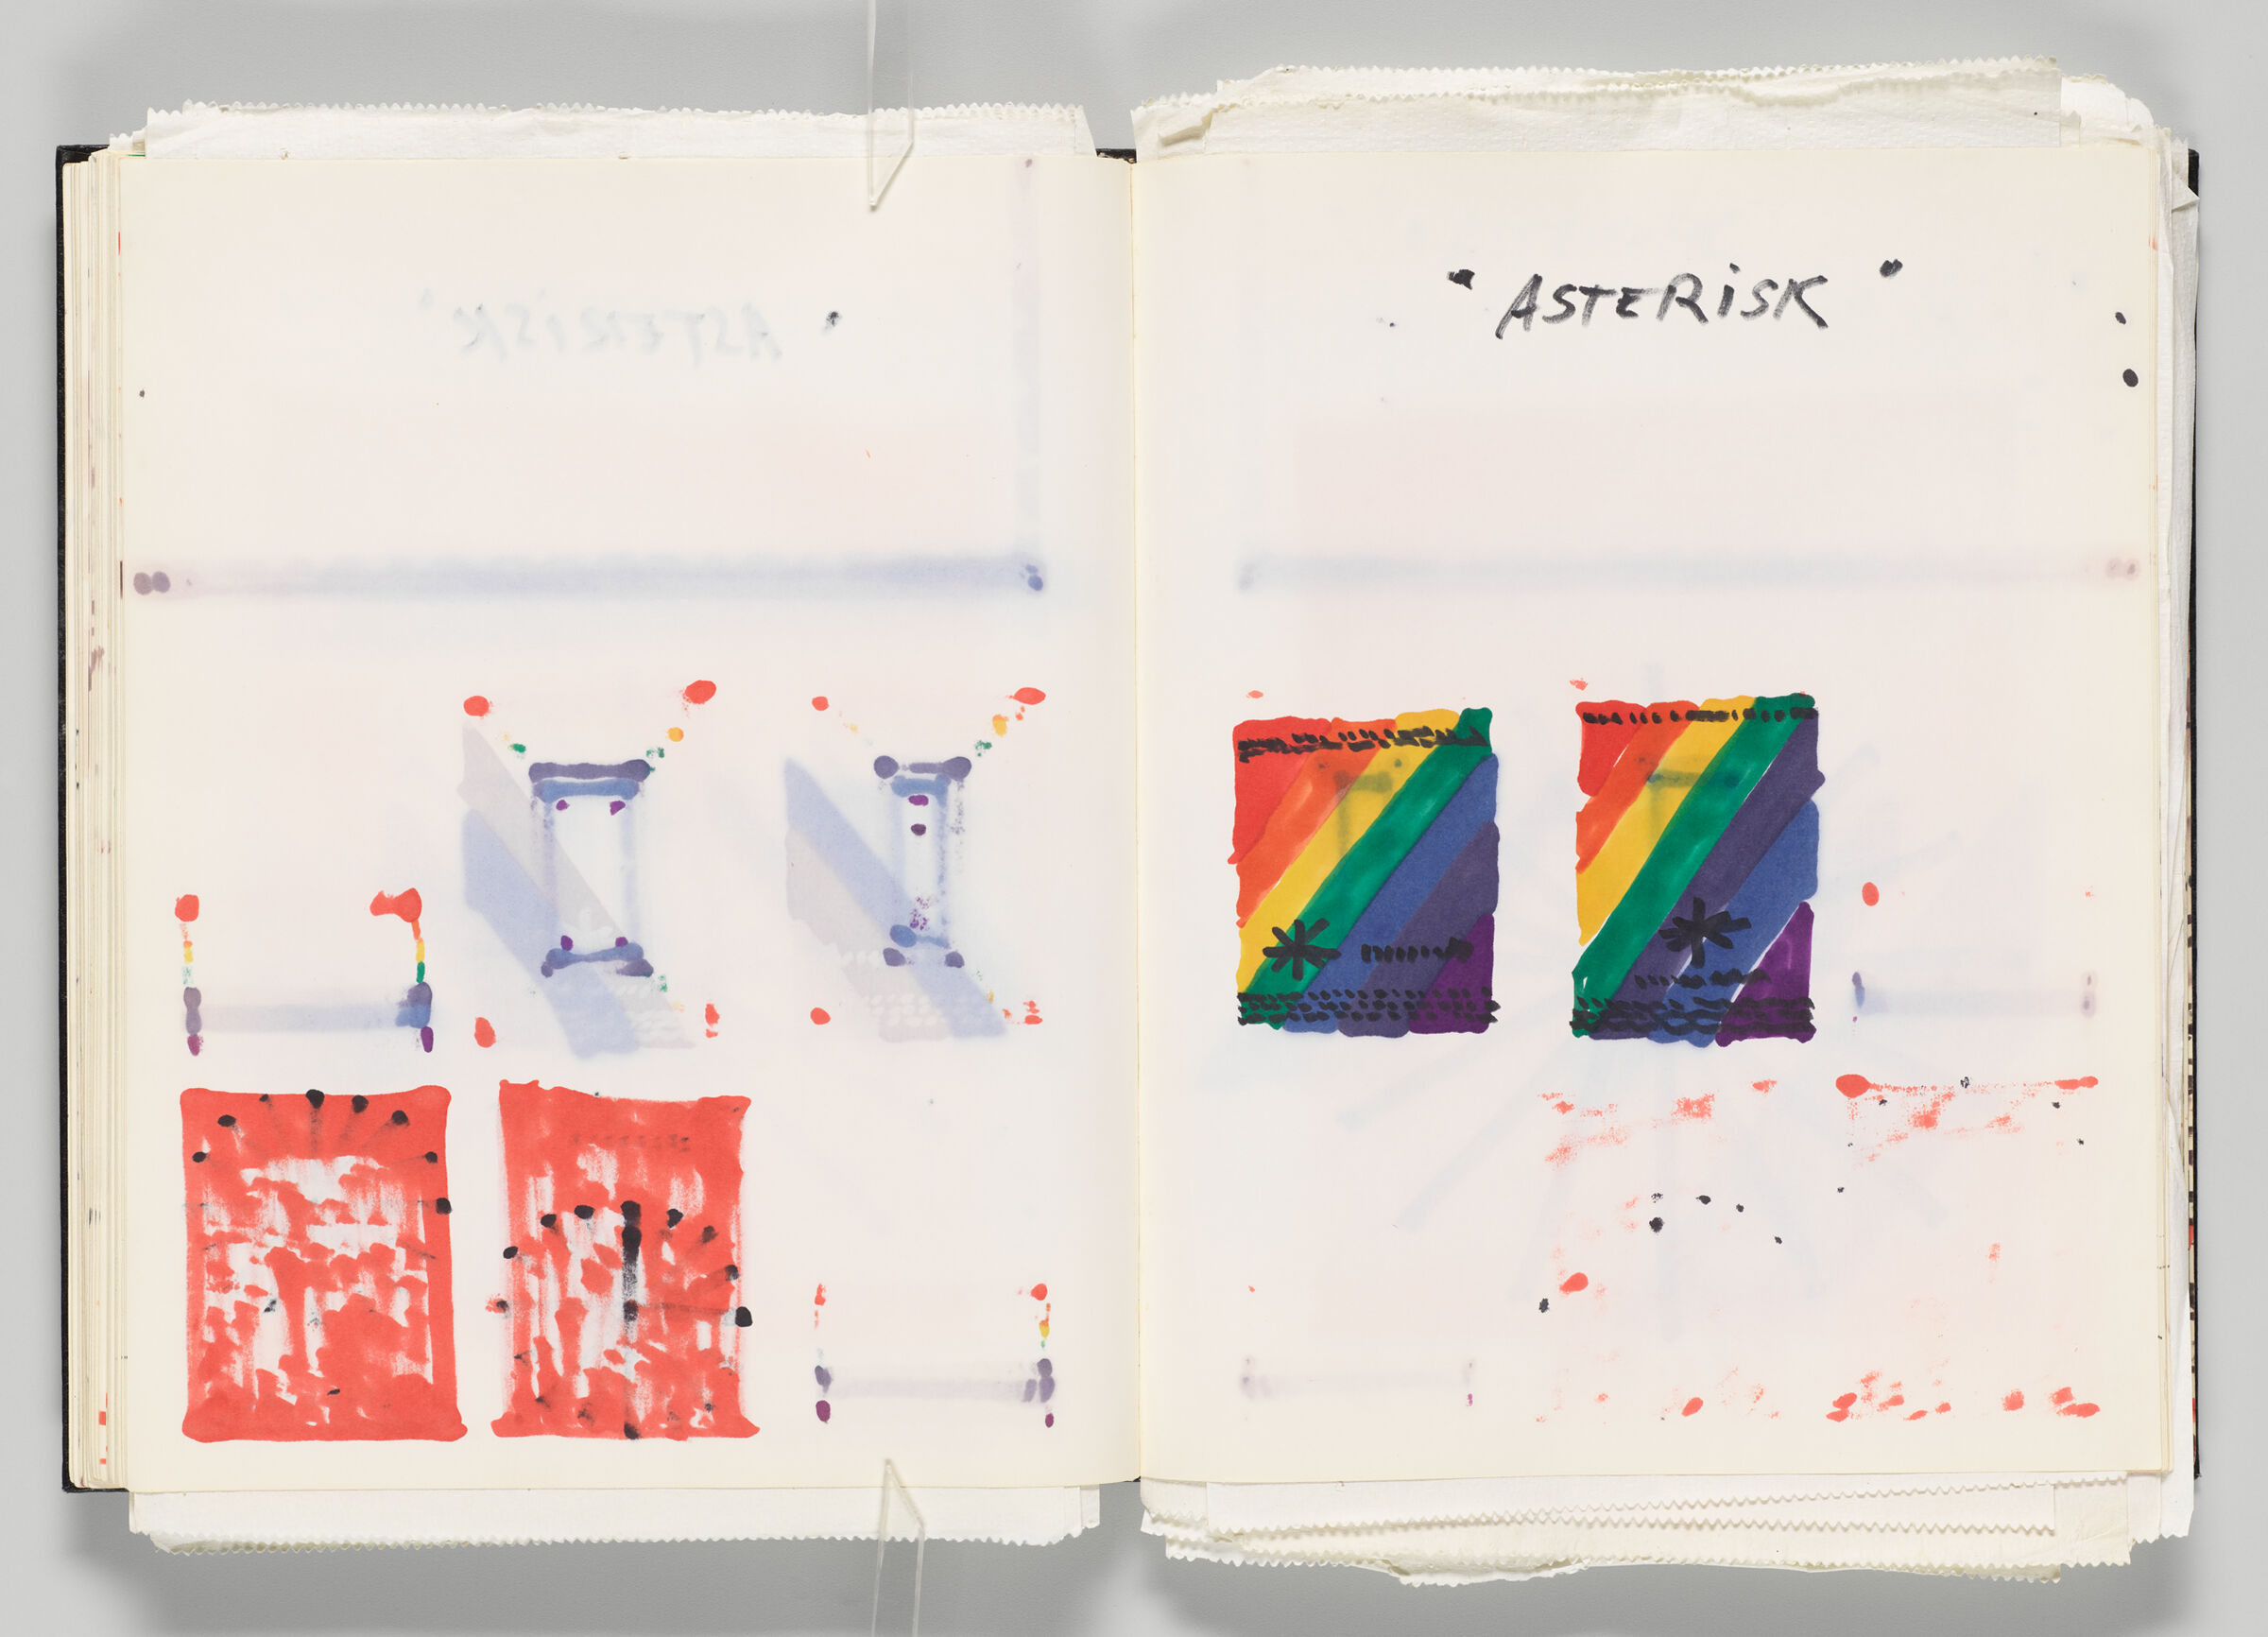 Untitled (Bleed-Through Of Previous Page, Left Page); Untitled (C.a.v.s. Poster Designs, Right Page)